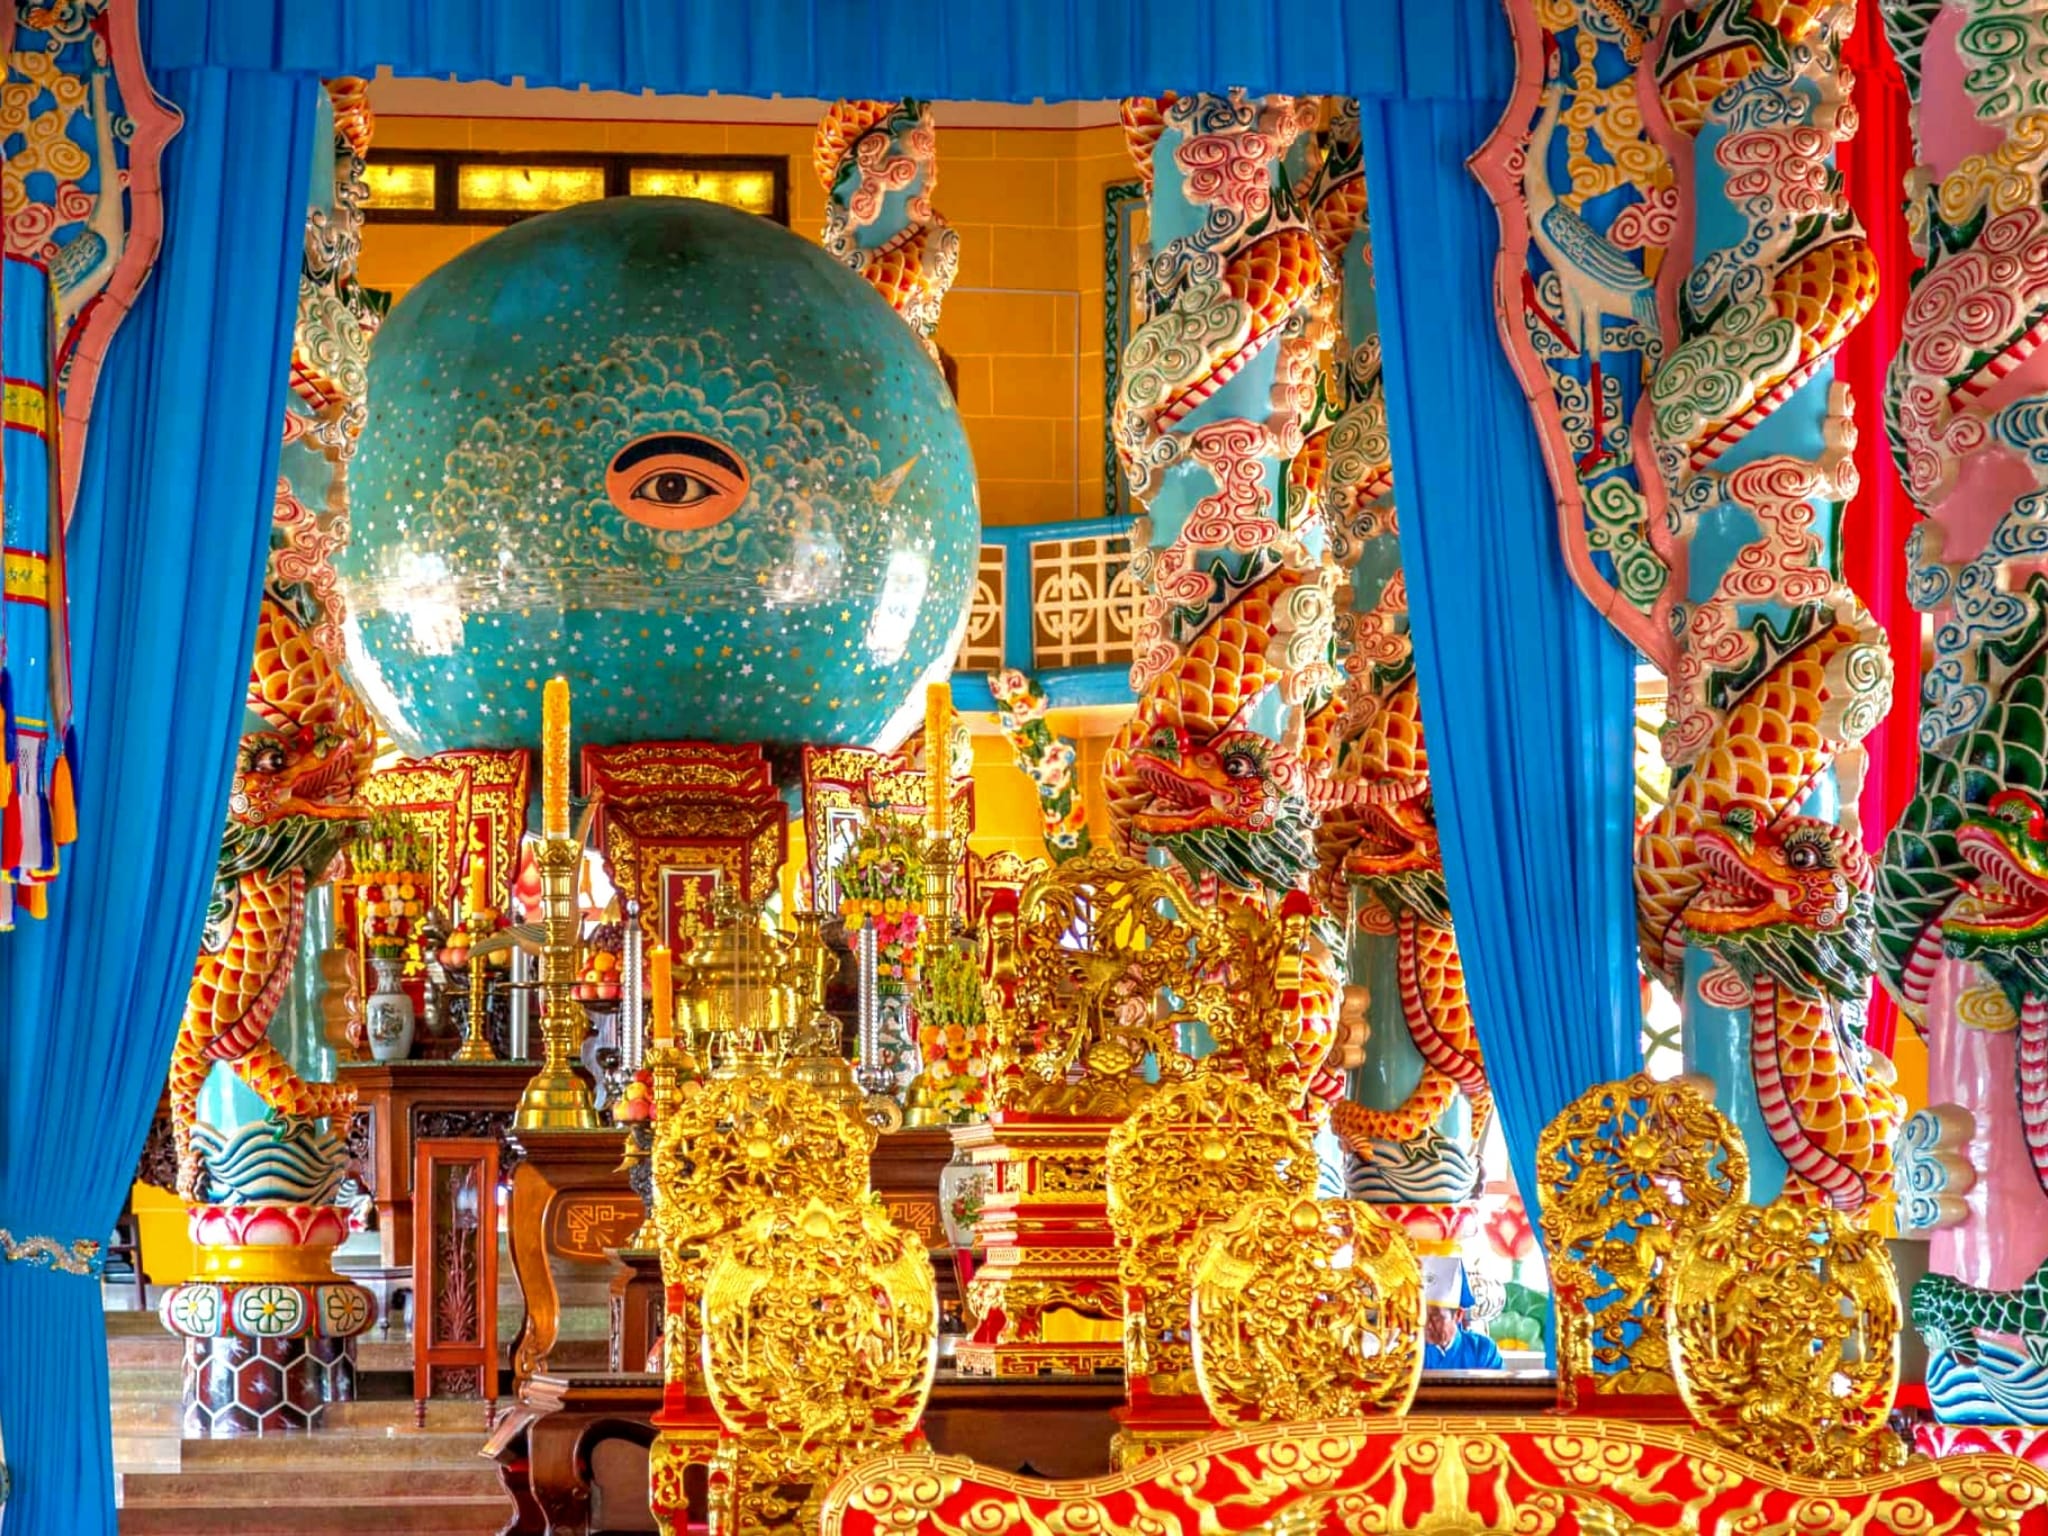 ST01: CLASSIC SOUTHERN VIETNAM PACKAGE TOUR